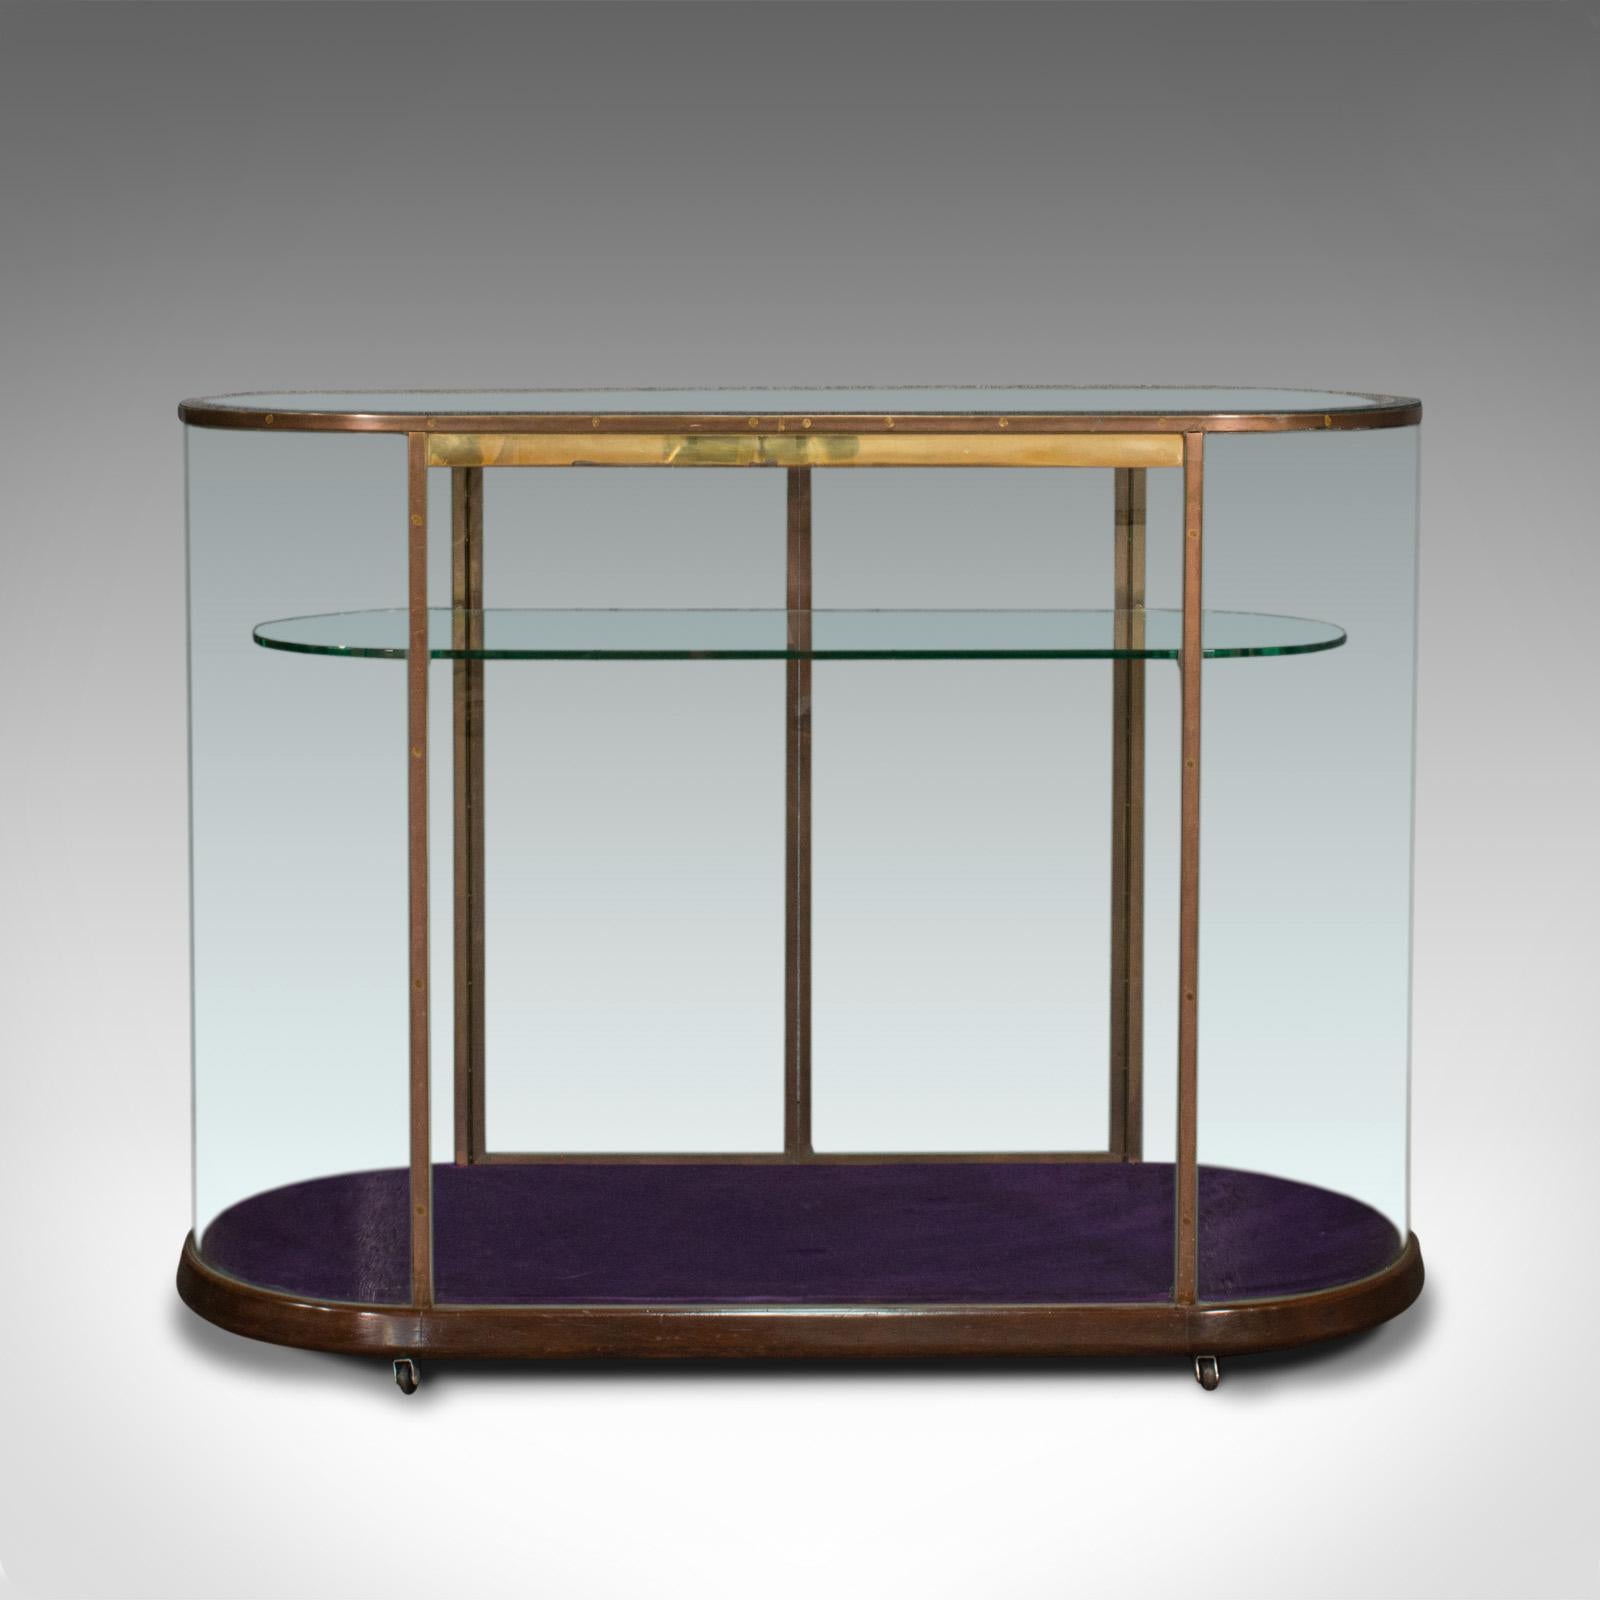 This is a large antique glazed display cabinet. An English, bronze shop retail showcase, dating to the Edwardian period, circa 1910.

Bright, open framed showcase with assured Edwardian elegance
Displaying a desirable aged patina - wear to top